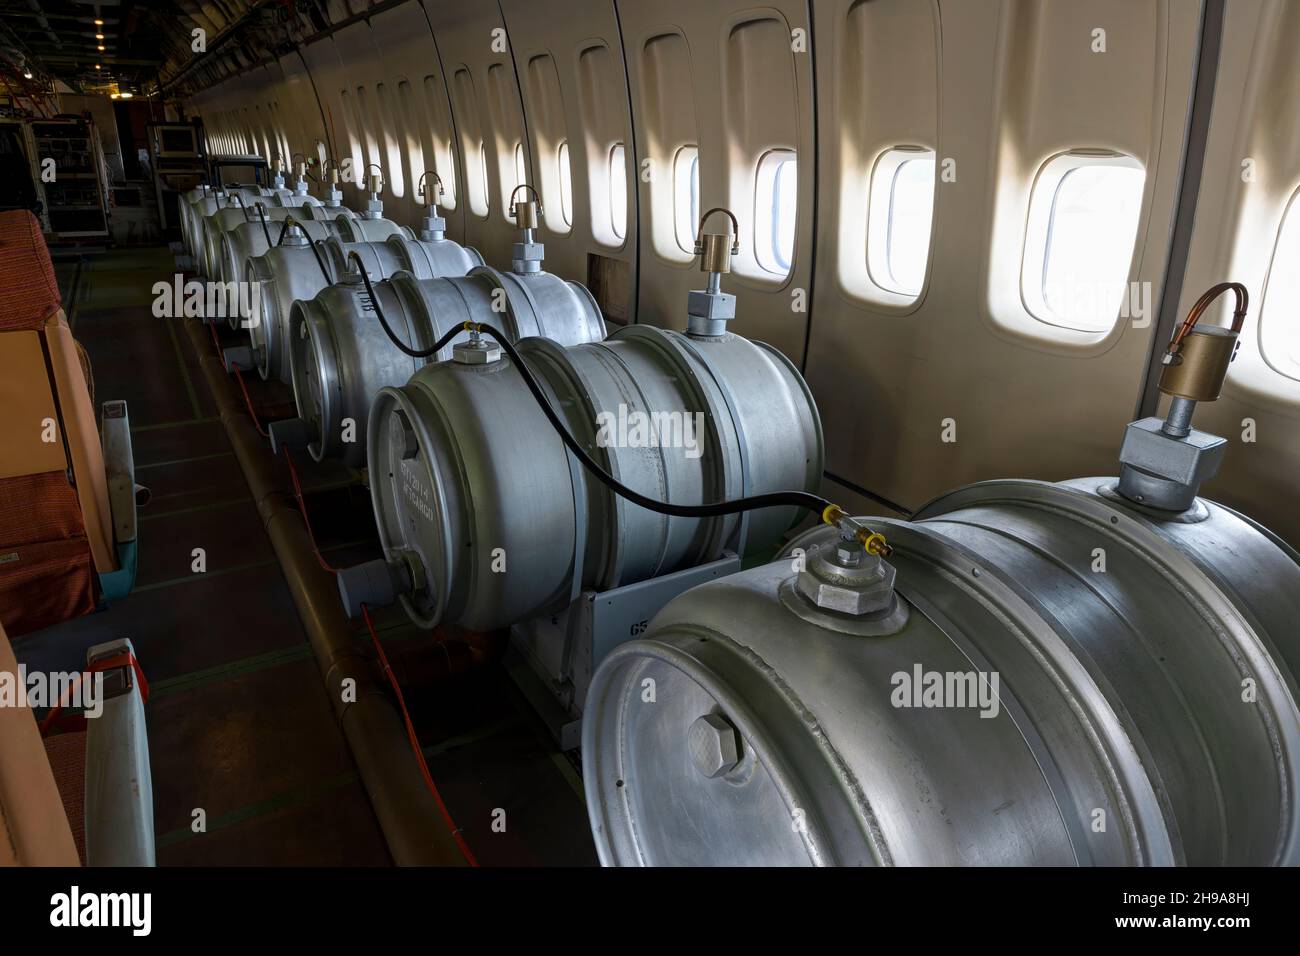 Water Ballast Barrels on Boeing 747.  Used to Control Center of Gravity During Test Flights.  Museum of Flight, Seattle, Washington State, USA Stock Photo